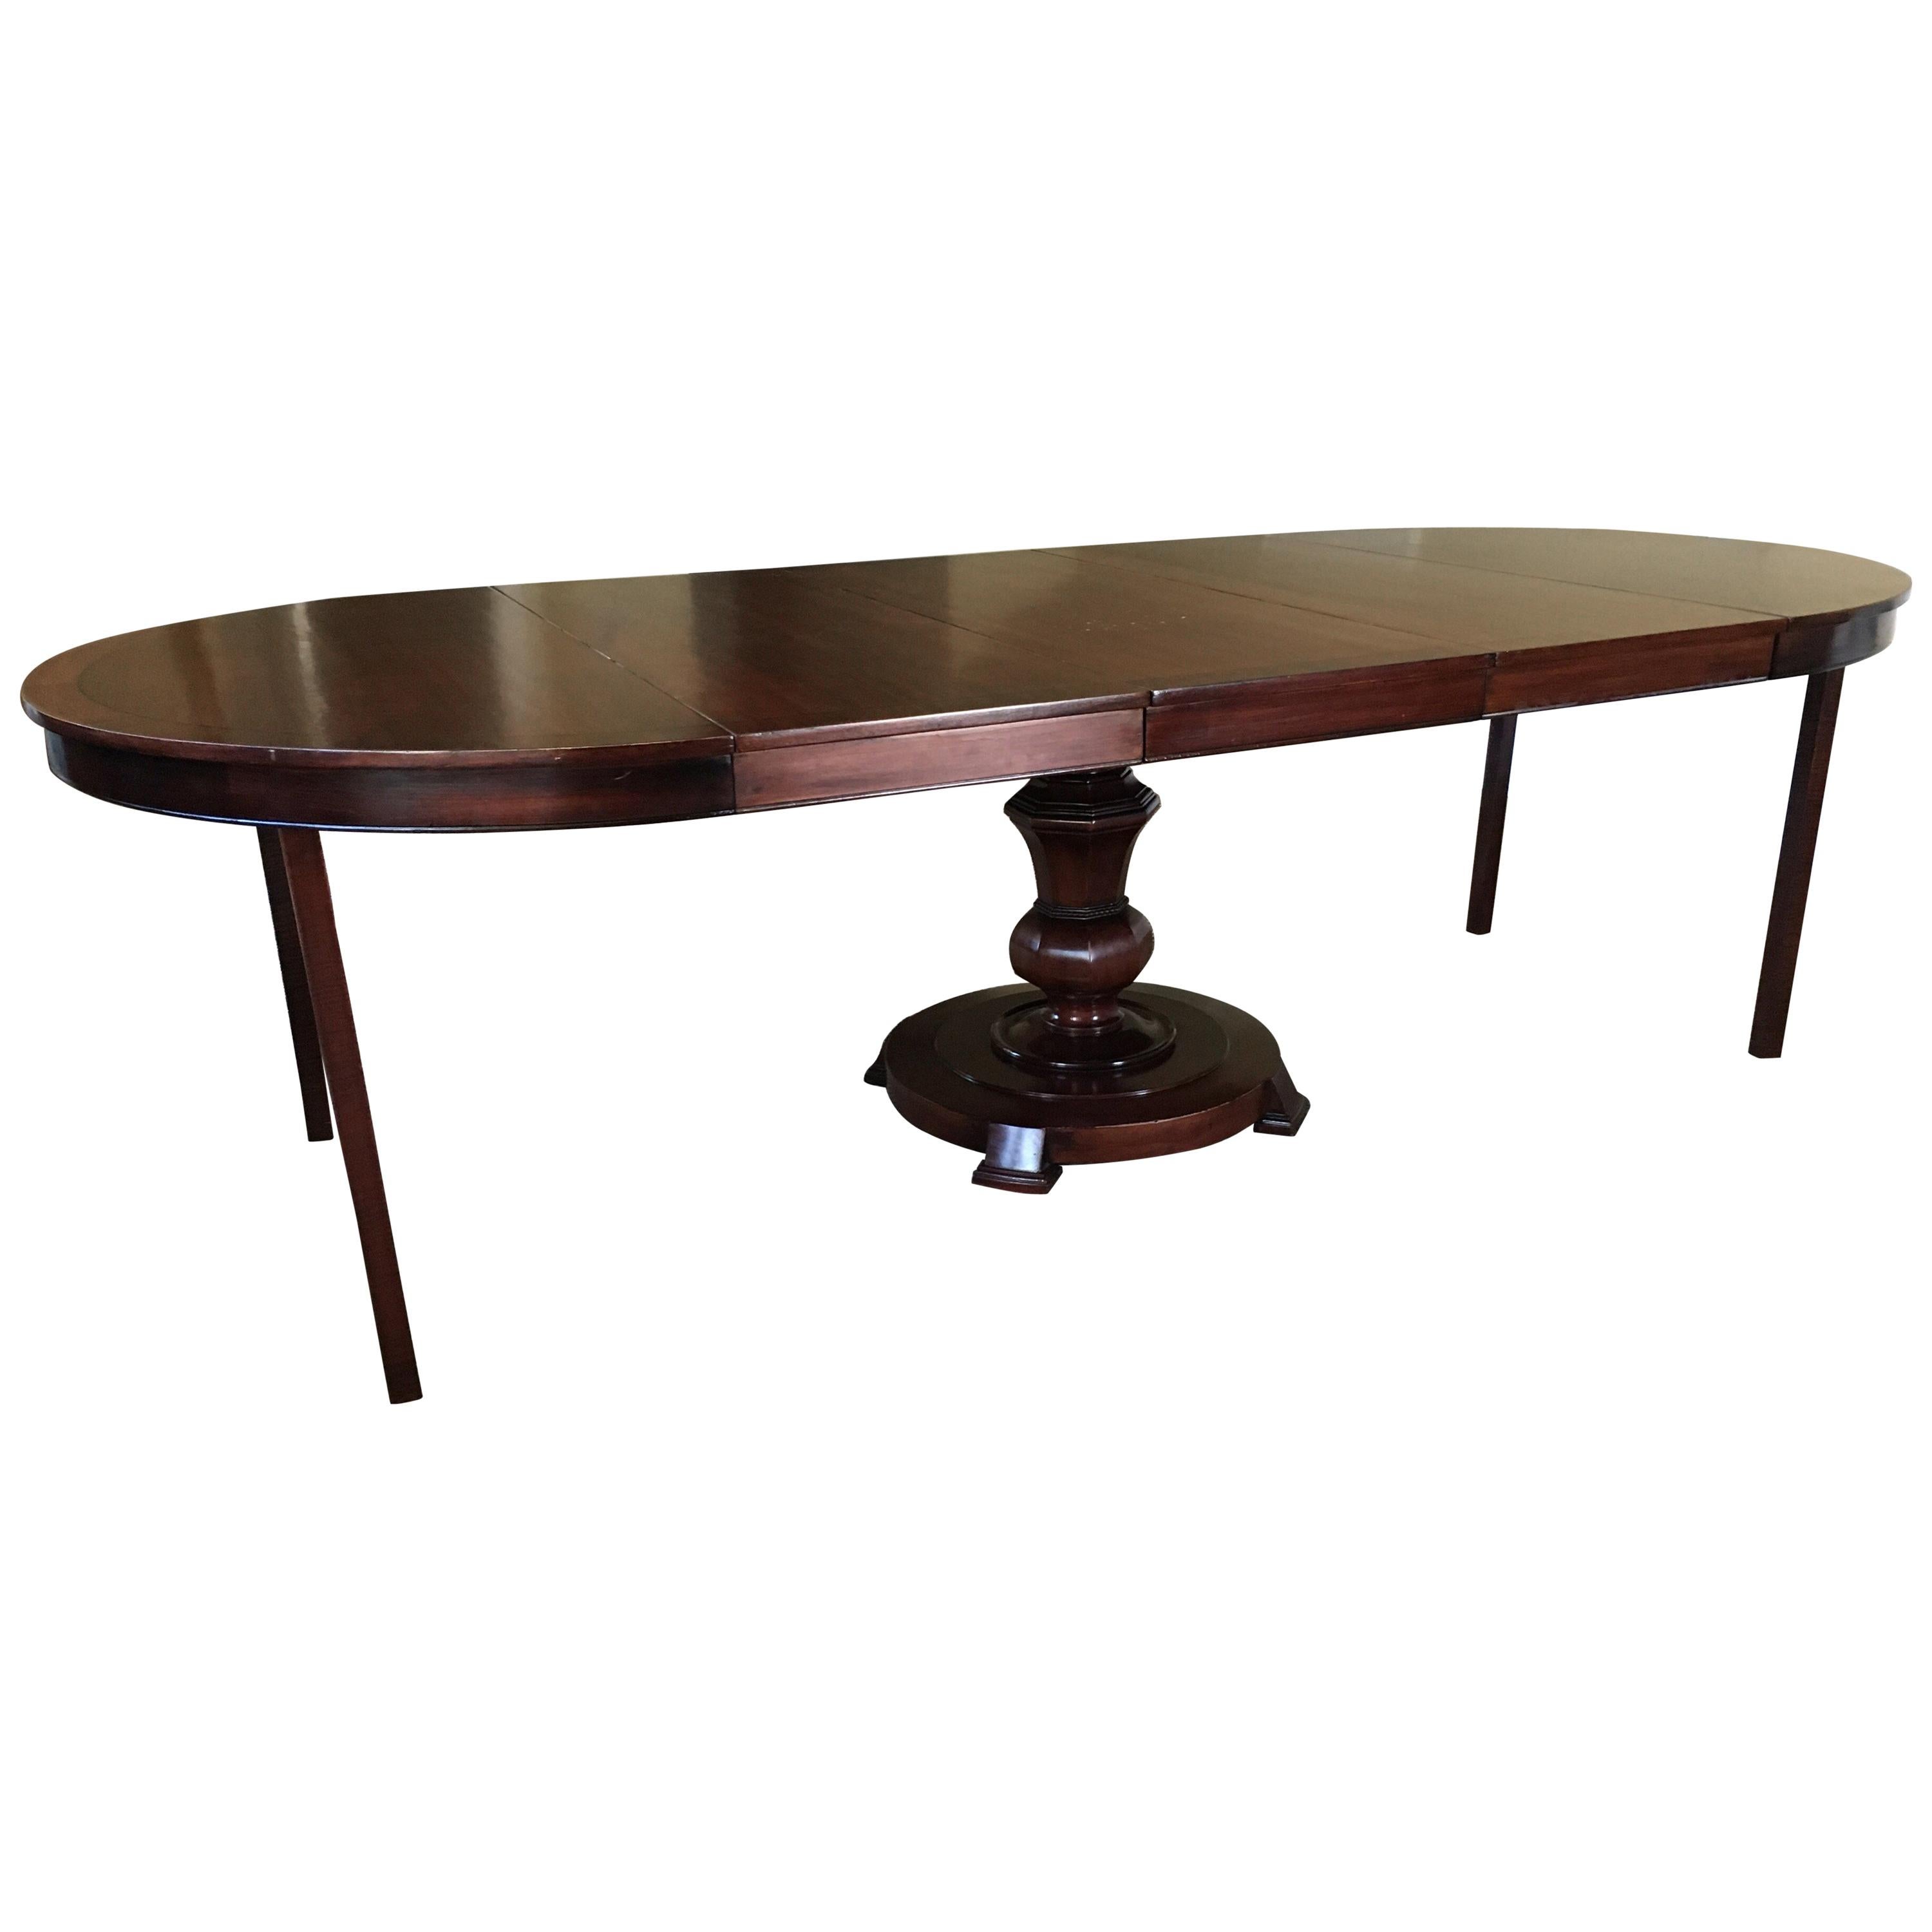 Round Rosewood Pedestal Center or Dining Table, 1950s by Maitland Ward